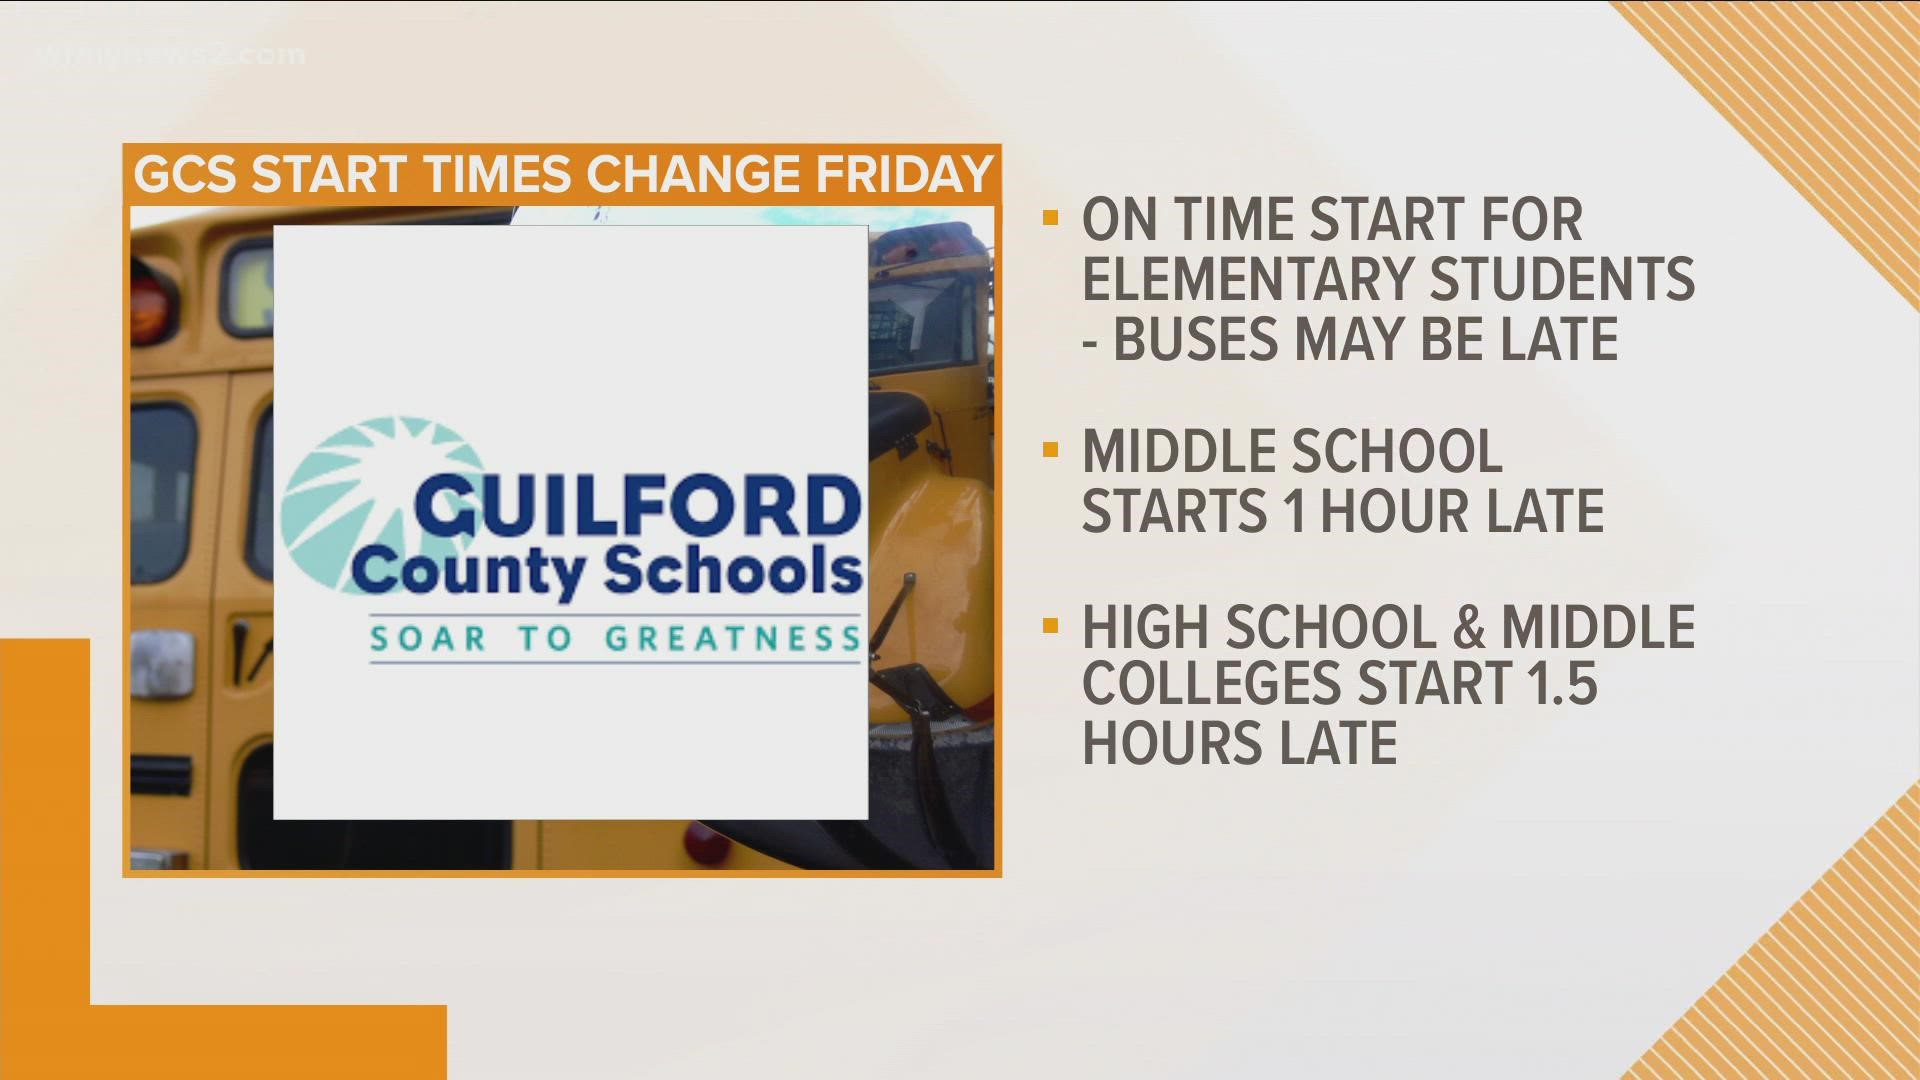 Guilford County Schools says middle and high schools will operate on a modified schedule on Friday. GCS doesn't have enough bus drivers because of COVID-19 issues.